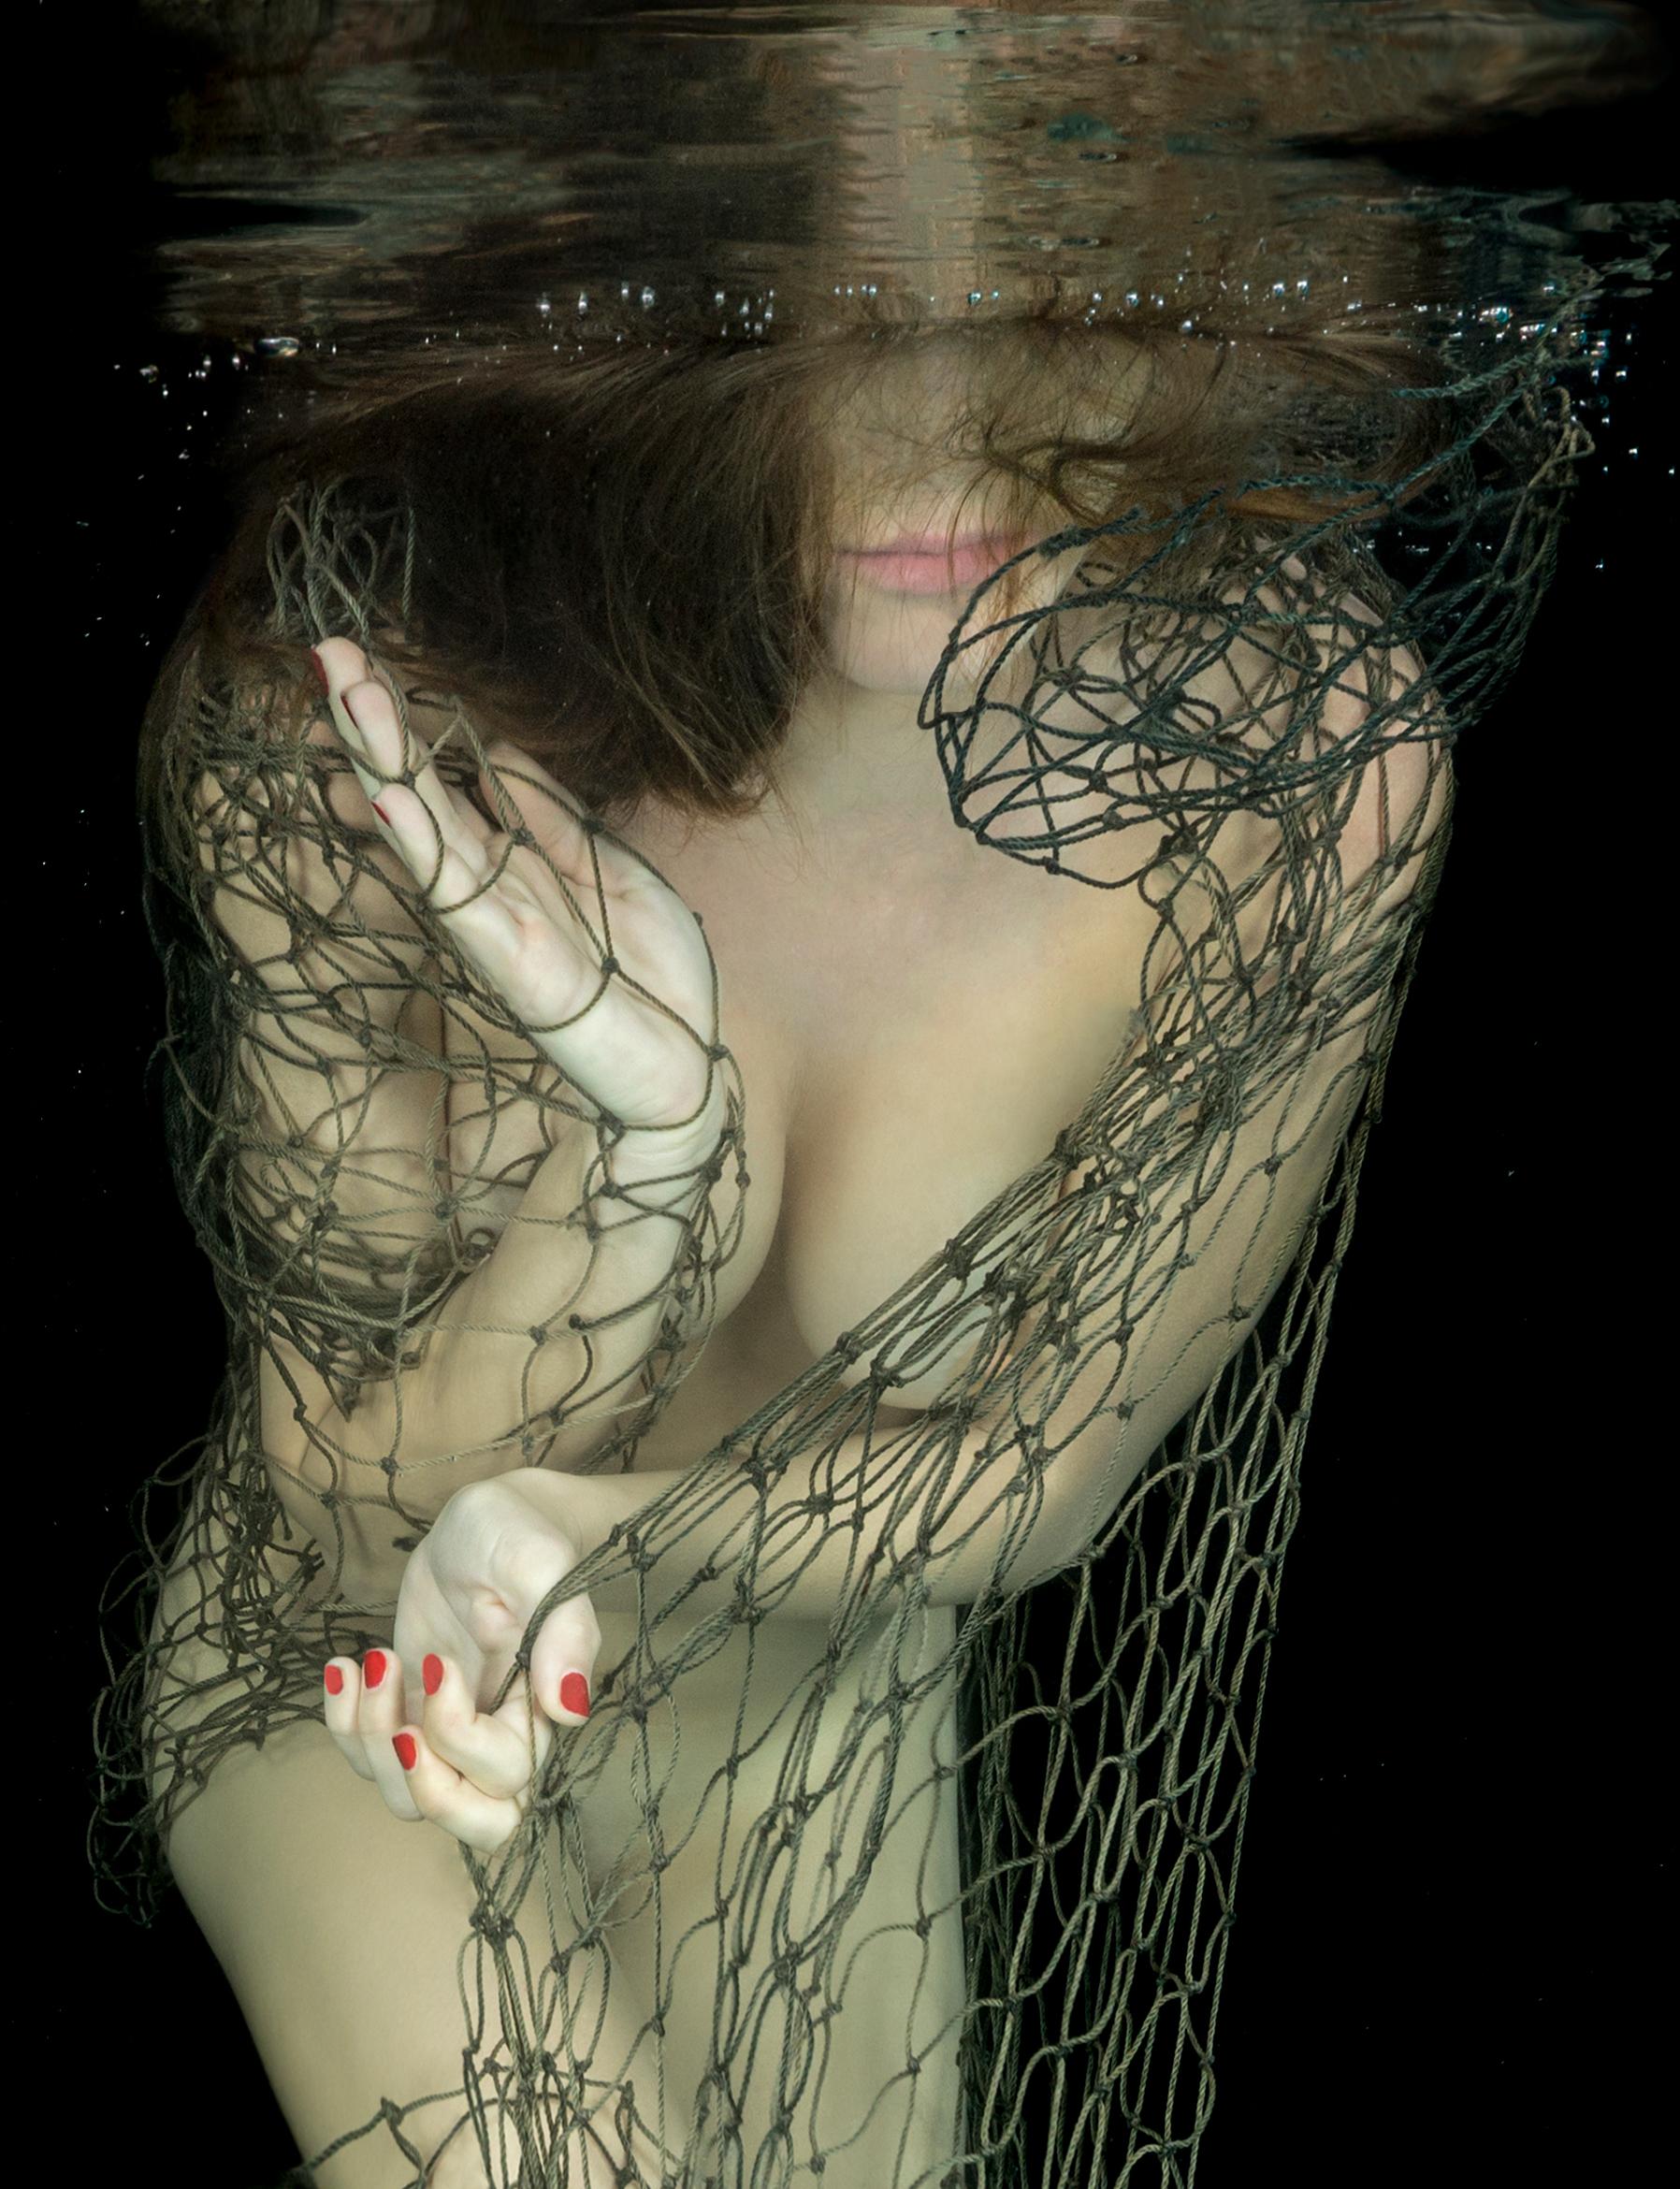 Lucky Catch - underwater nude photograph - archival pigment print 24x18"